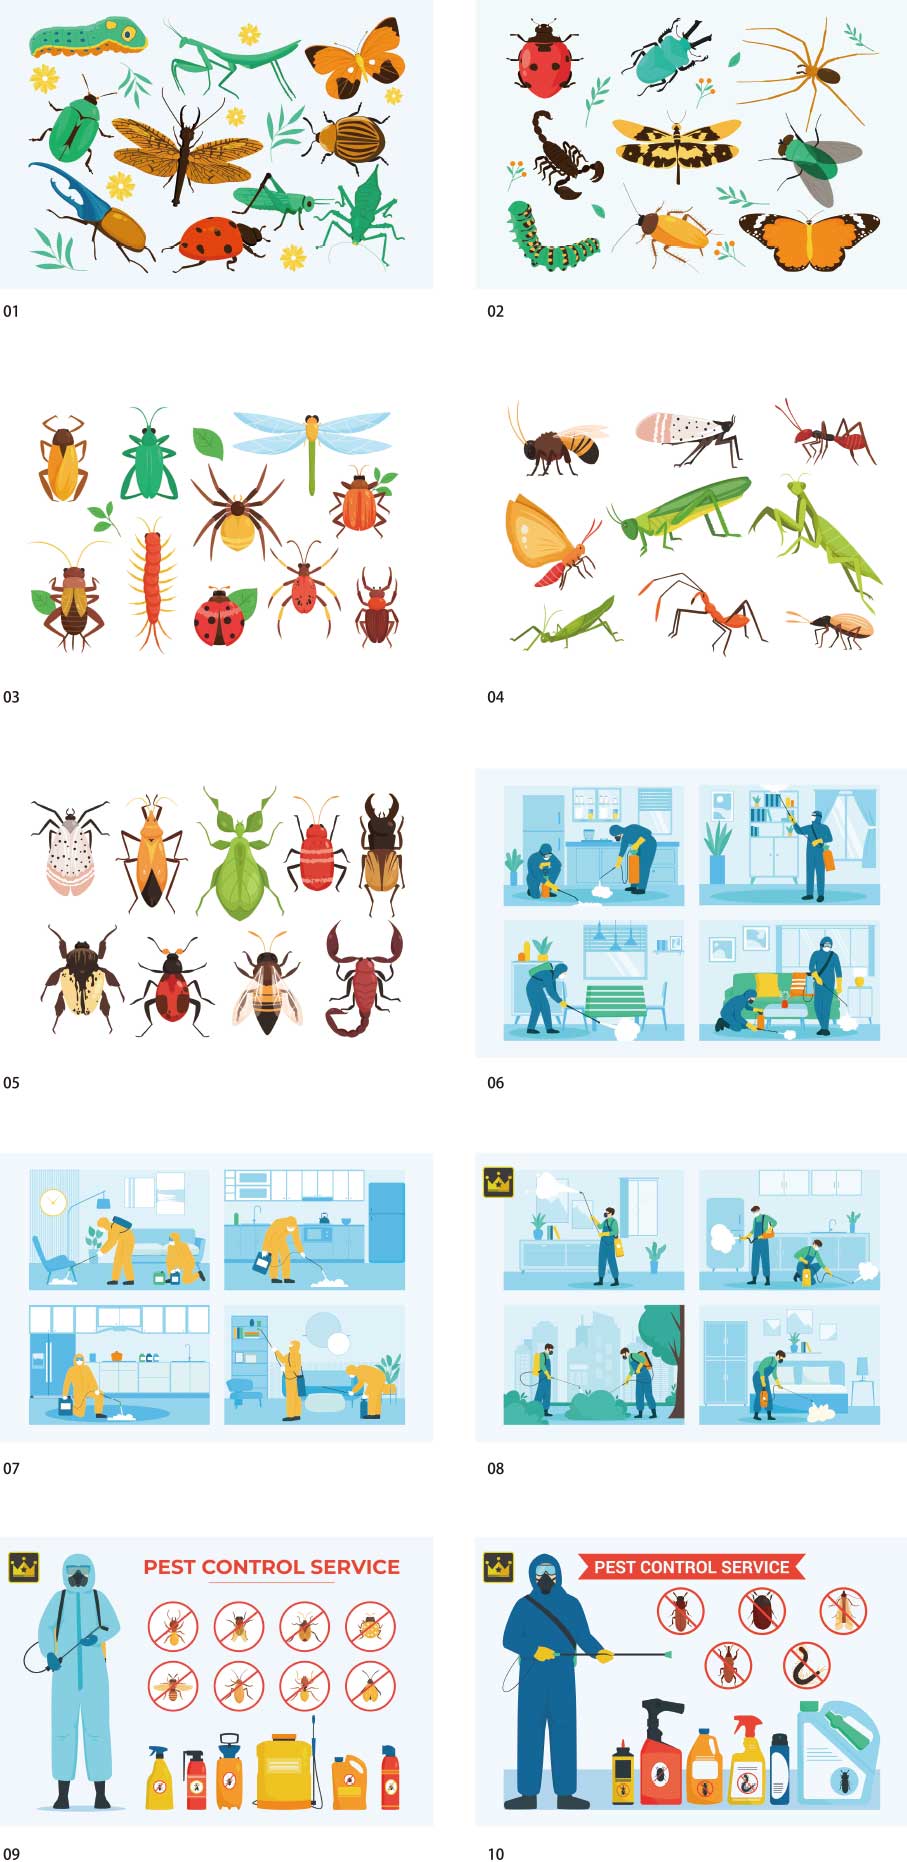 insect illustration collection